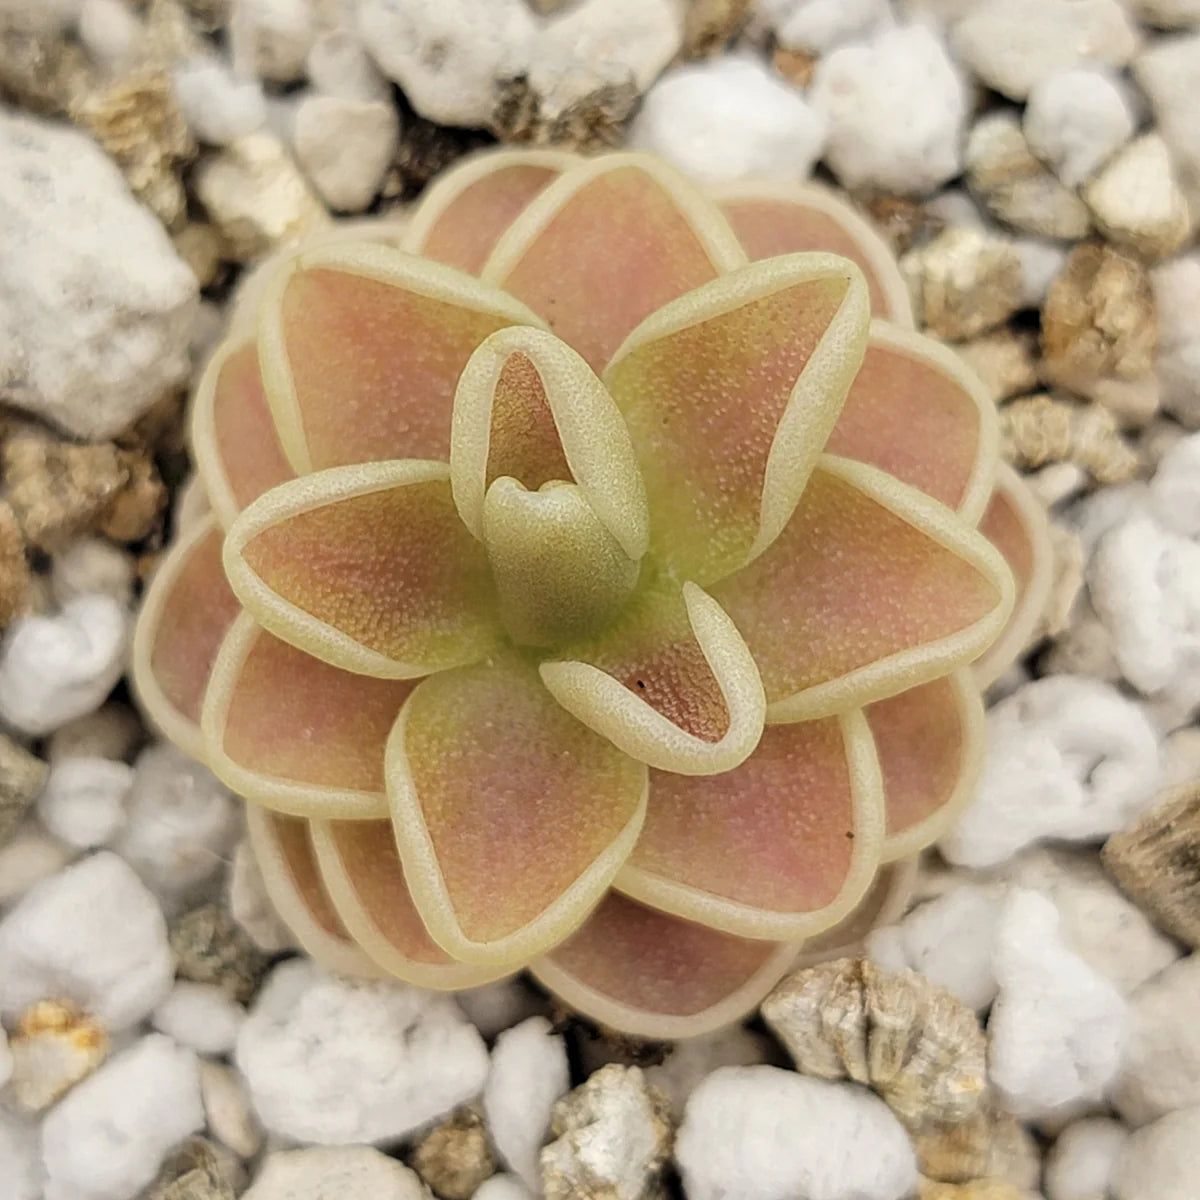 Pinguicula 'Yucca Do 1718' Butterwort Plant - Tissue Culture Cup